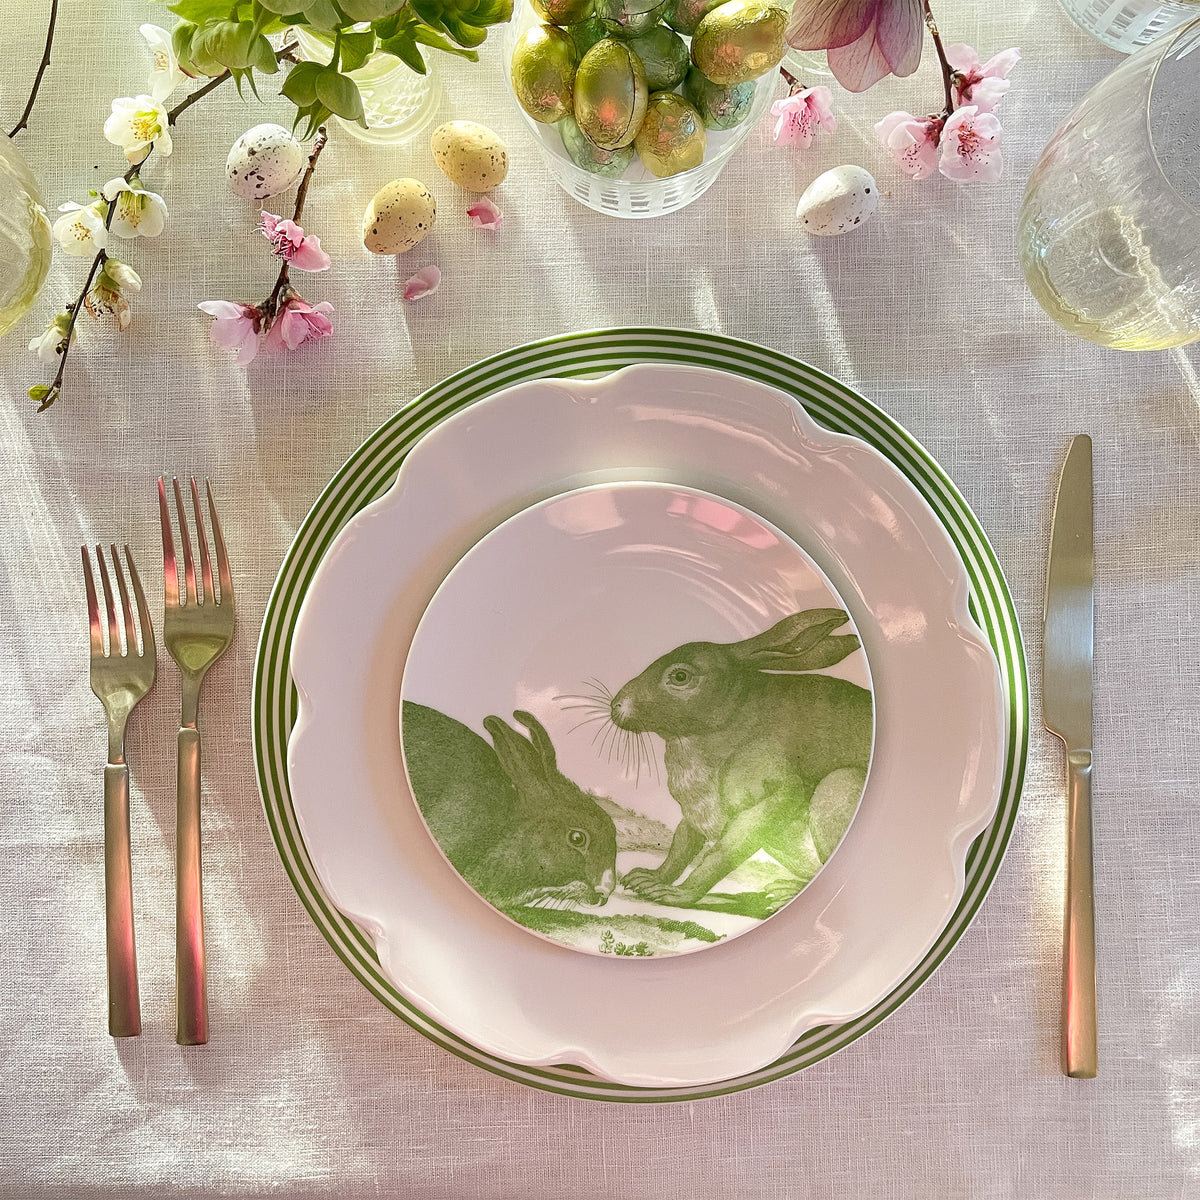 An Easter table setting with Green Bunnies Canapé Plates by Caskata and silverware.